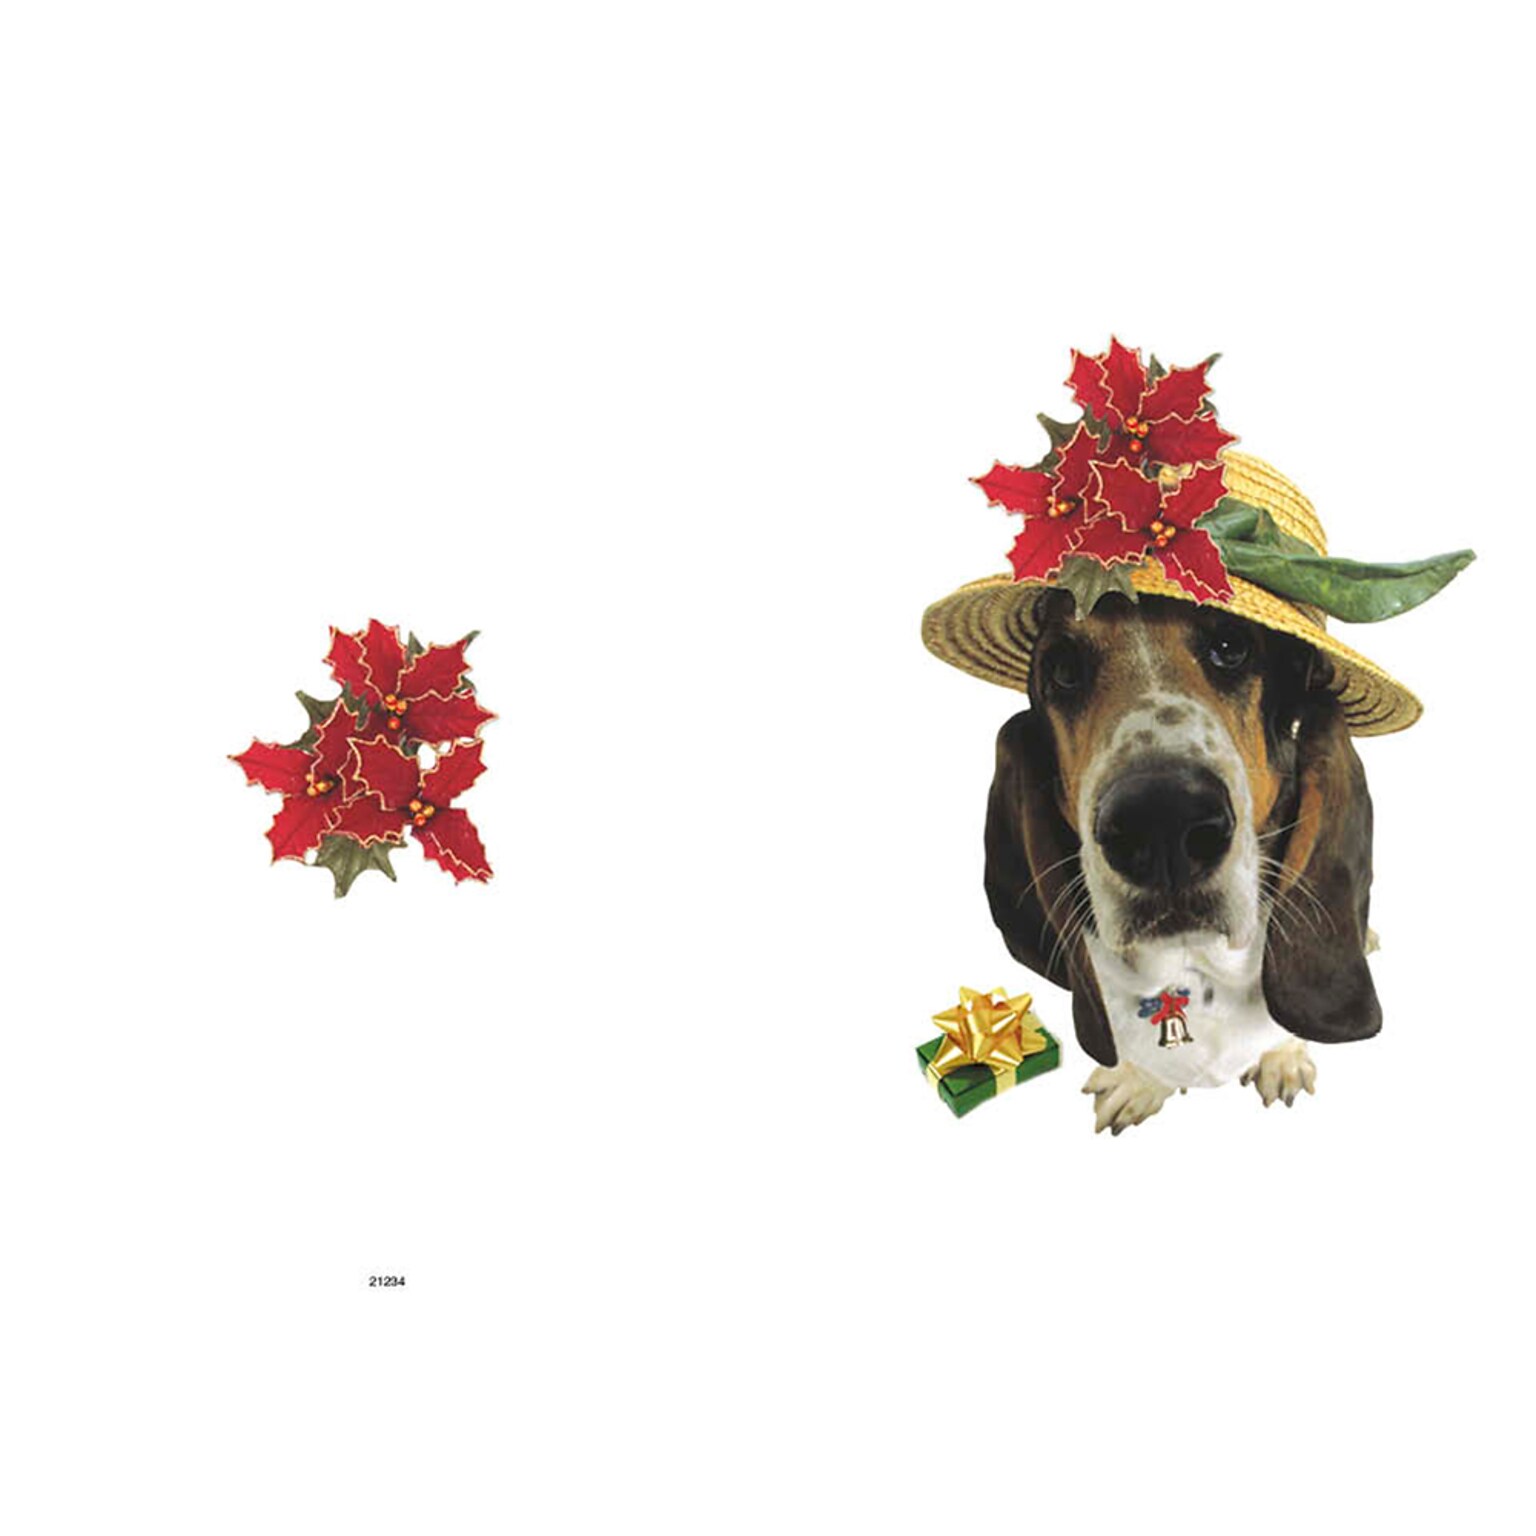 Hound Dog with Hat on - 7 x 10 scored for folding to 7 x 5, 25 cards w/A7 envelopes per set